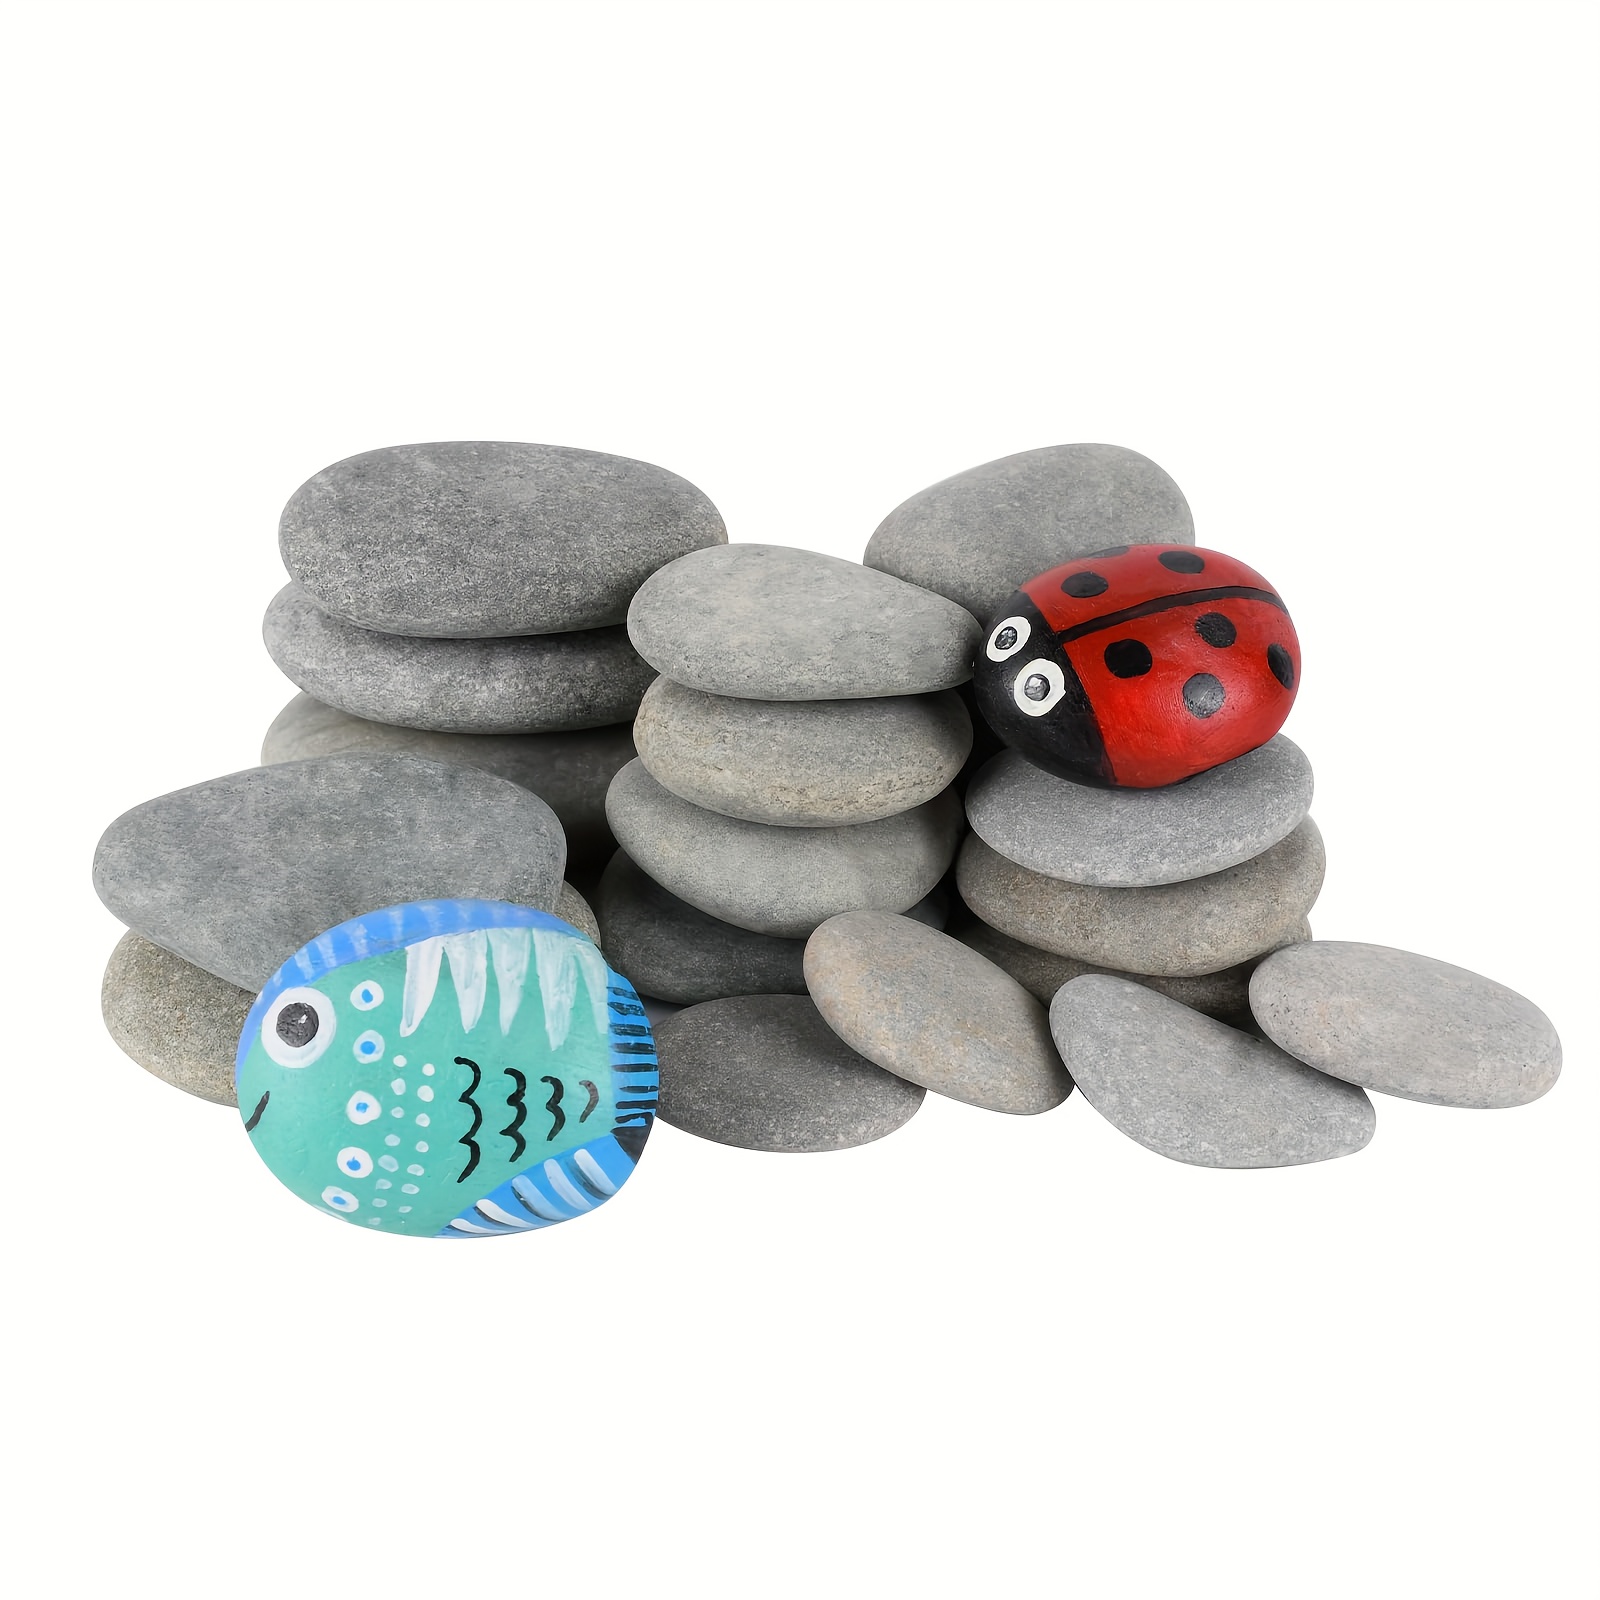 River Rocks Painting Flat Smooth Multi color Painting Stones